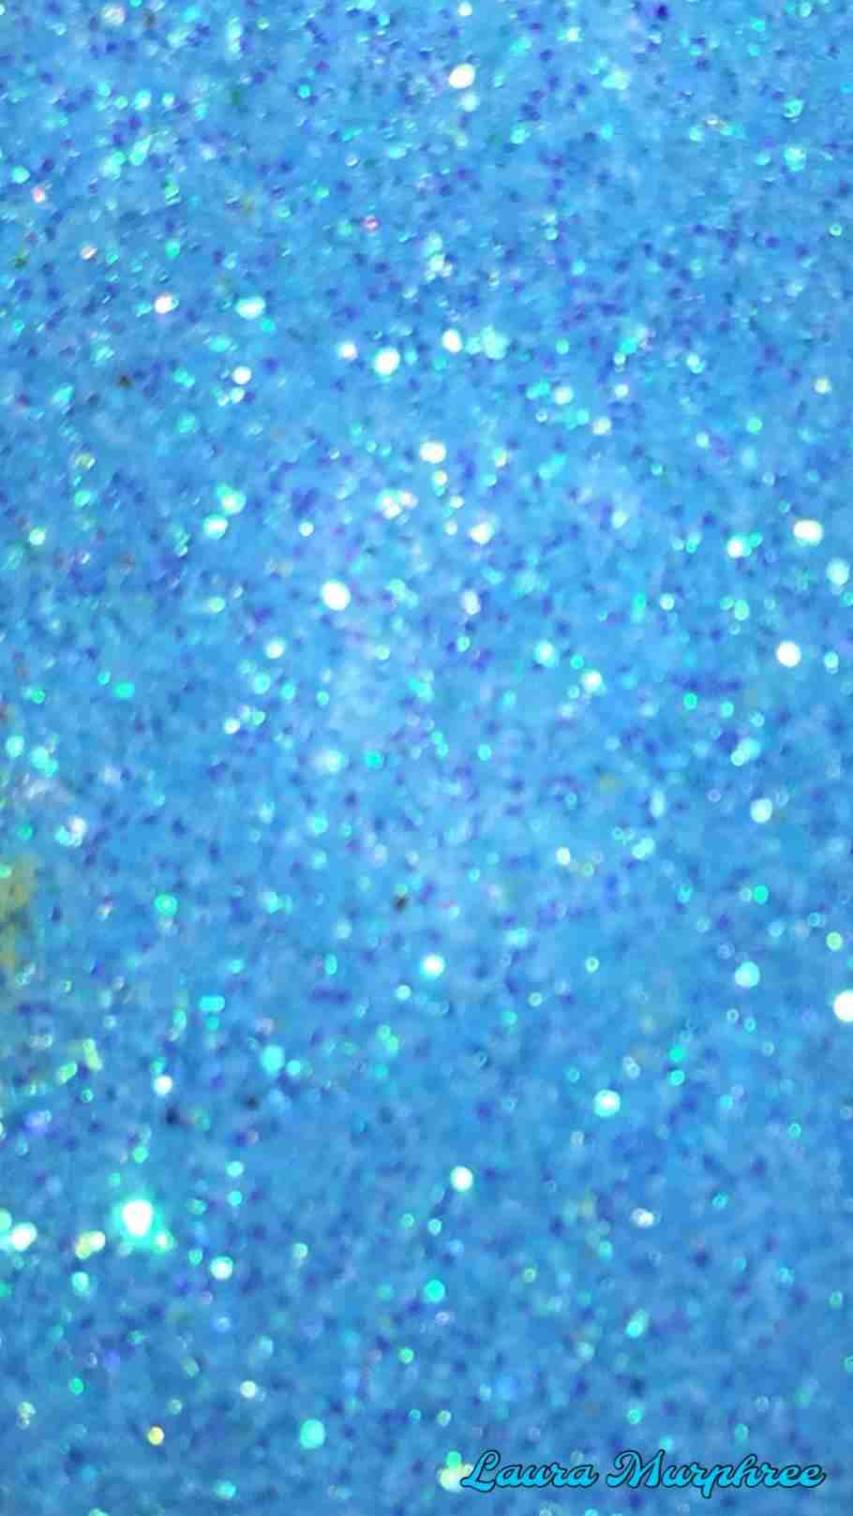 Blue Aesthetic Glitter hd Wallpaper Pictures for Phone